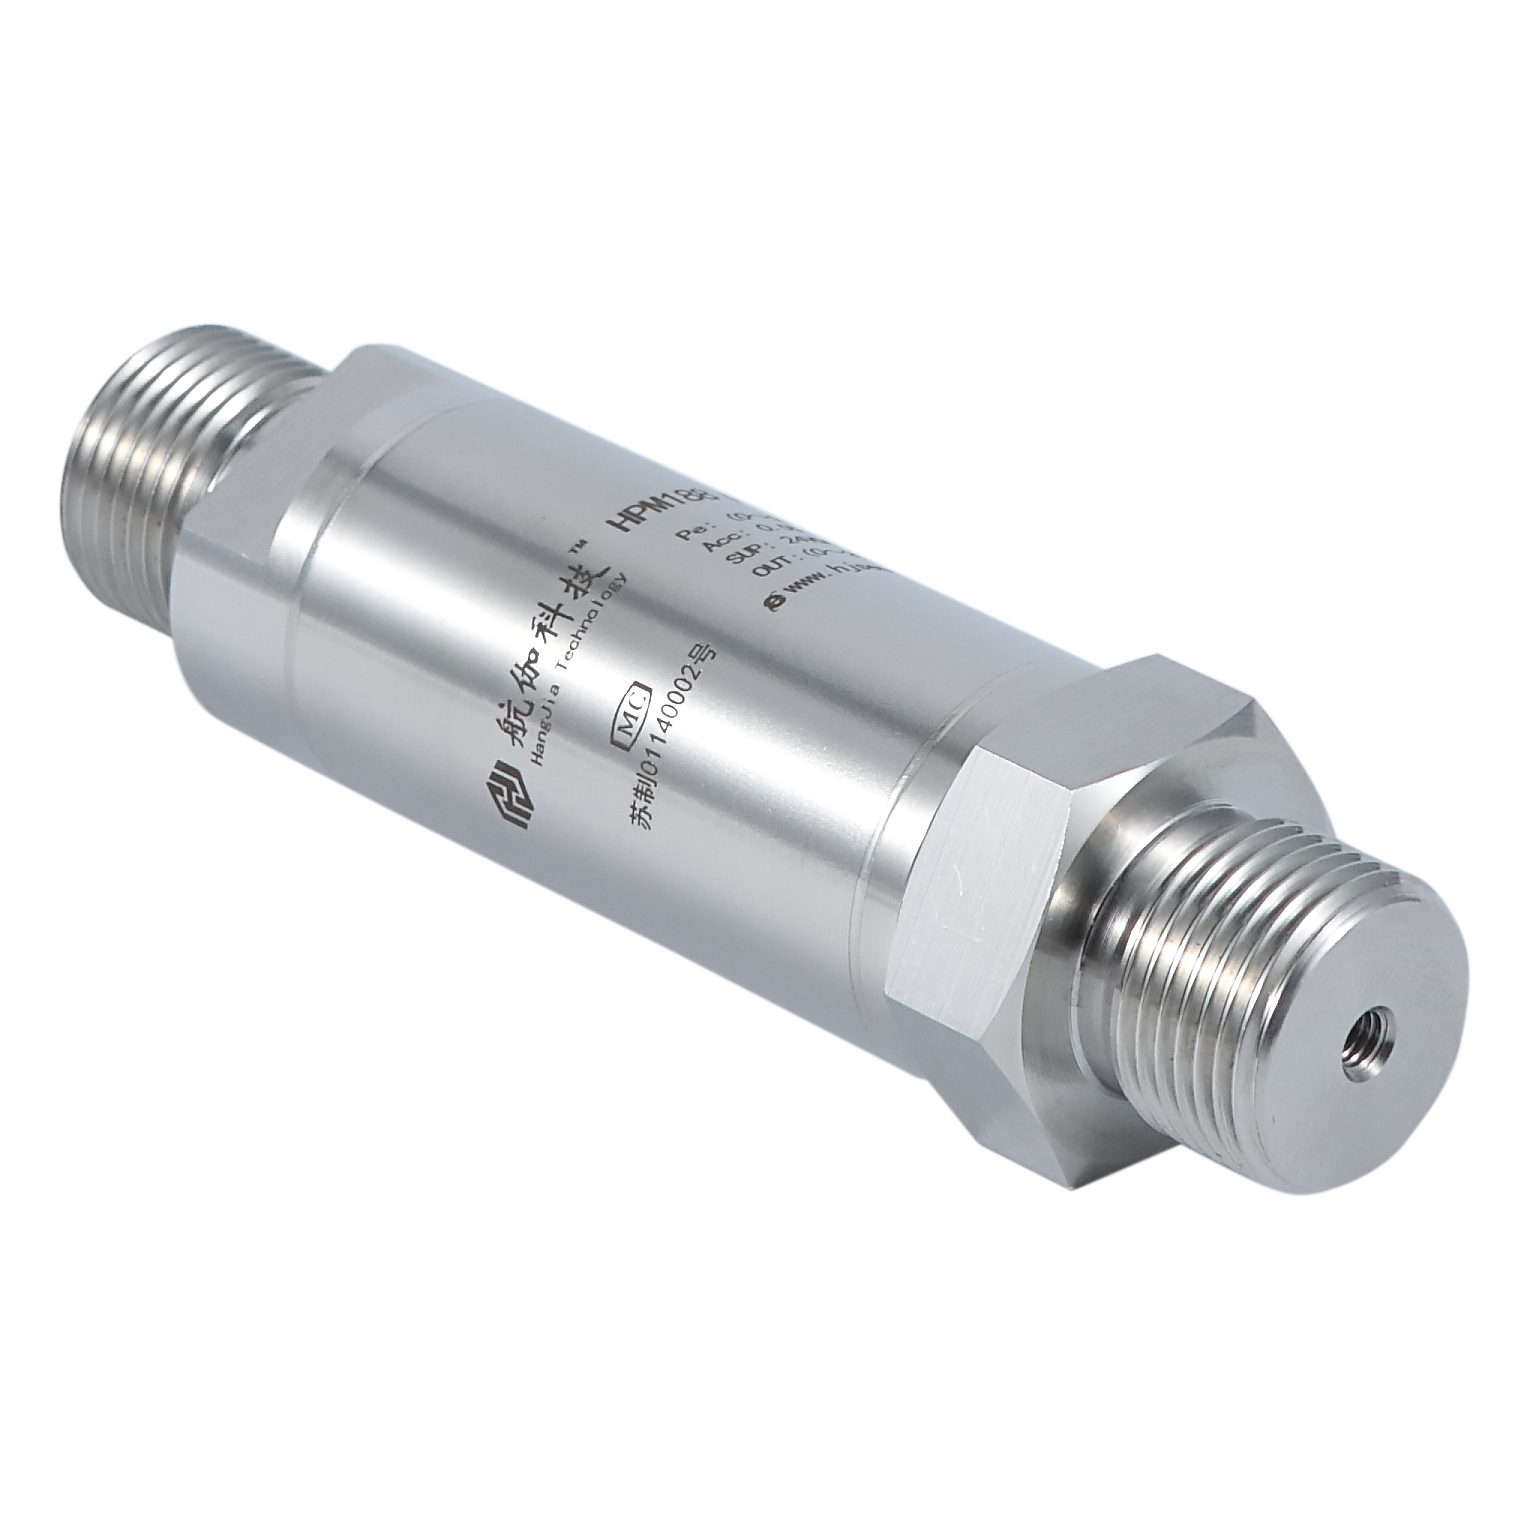 HPM188 4-20mA Voltage Output Explosion-proof Pressure Transmitter